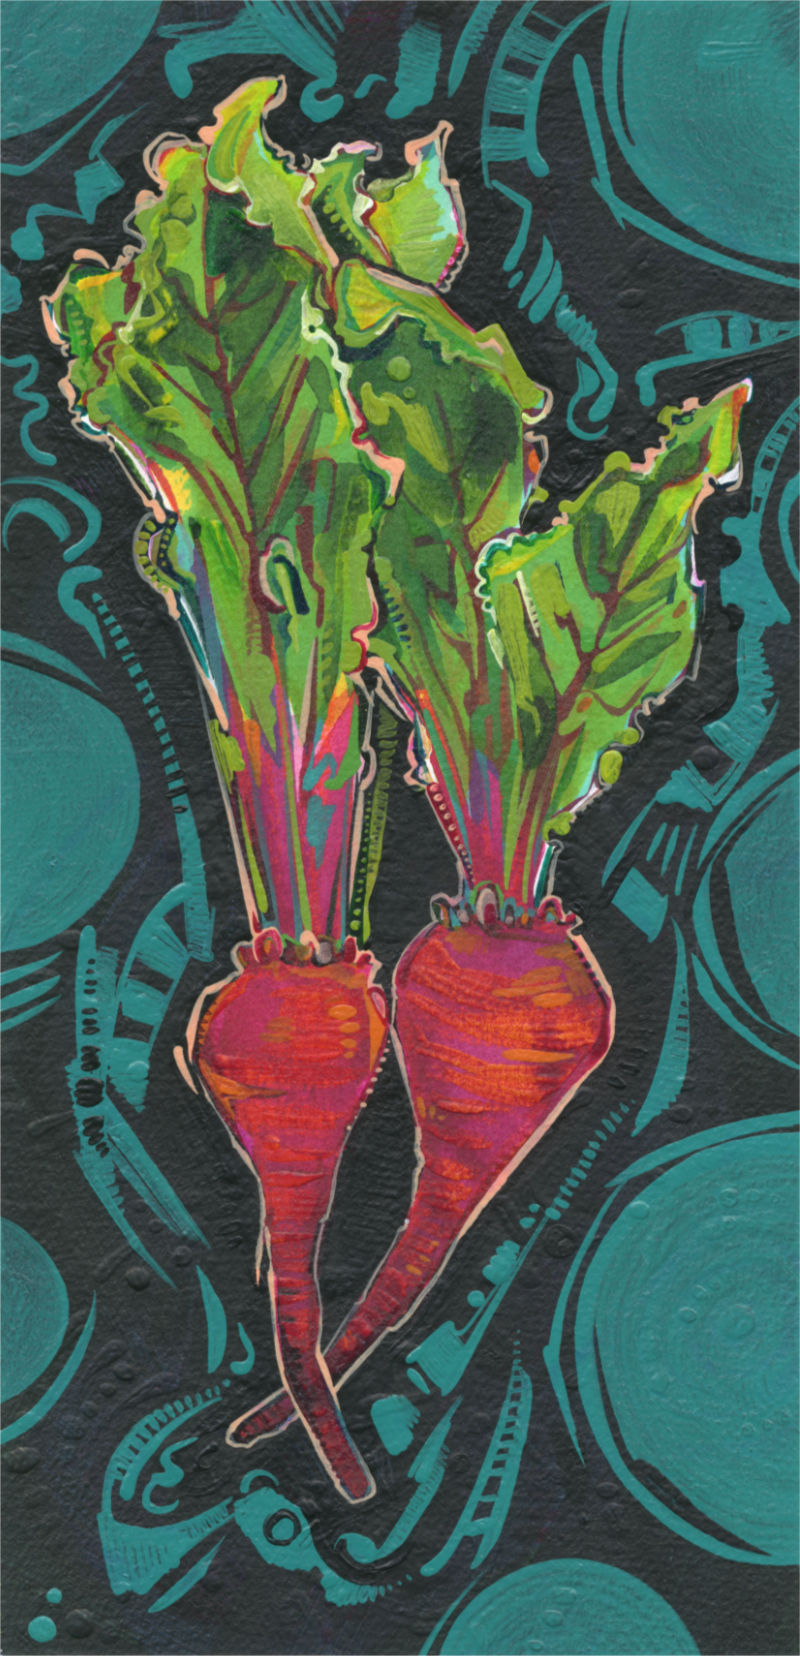 brightly colored beautiful food art showing beet root vegetables and greens, artwork by Gwenn Seemel